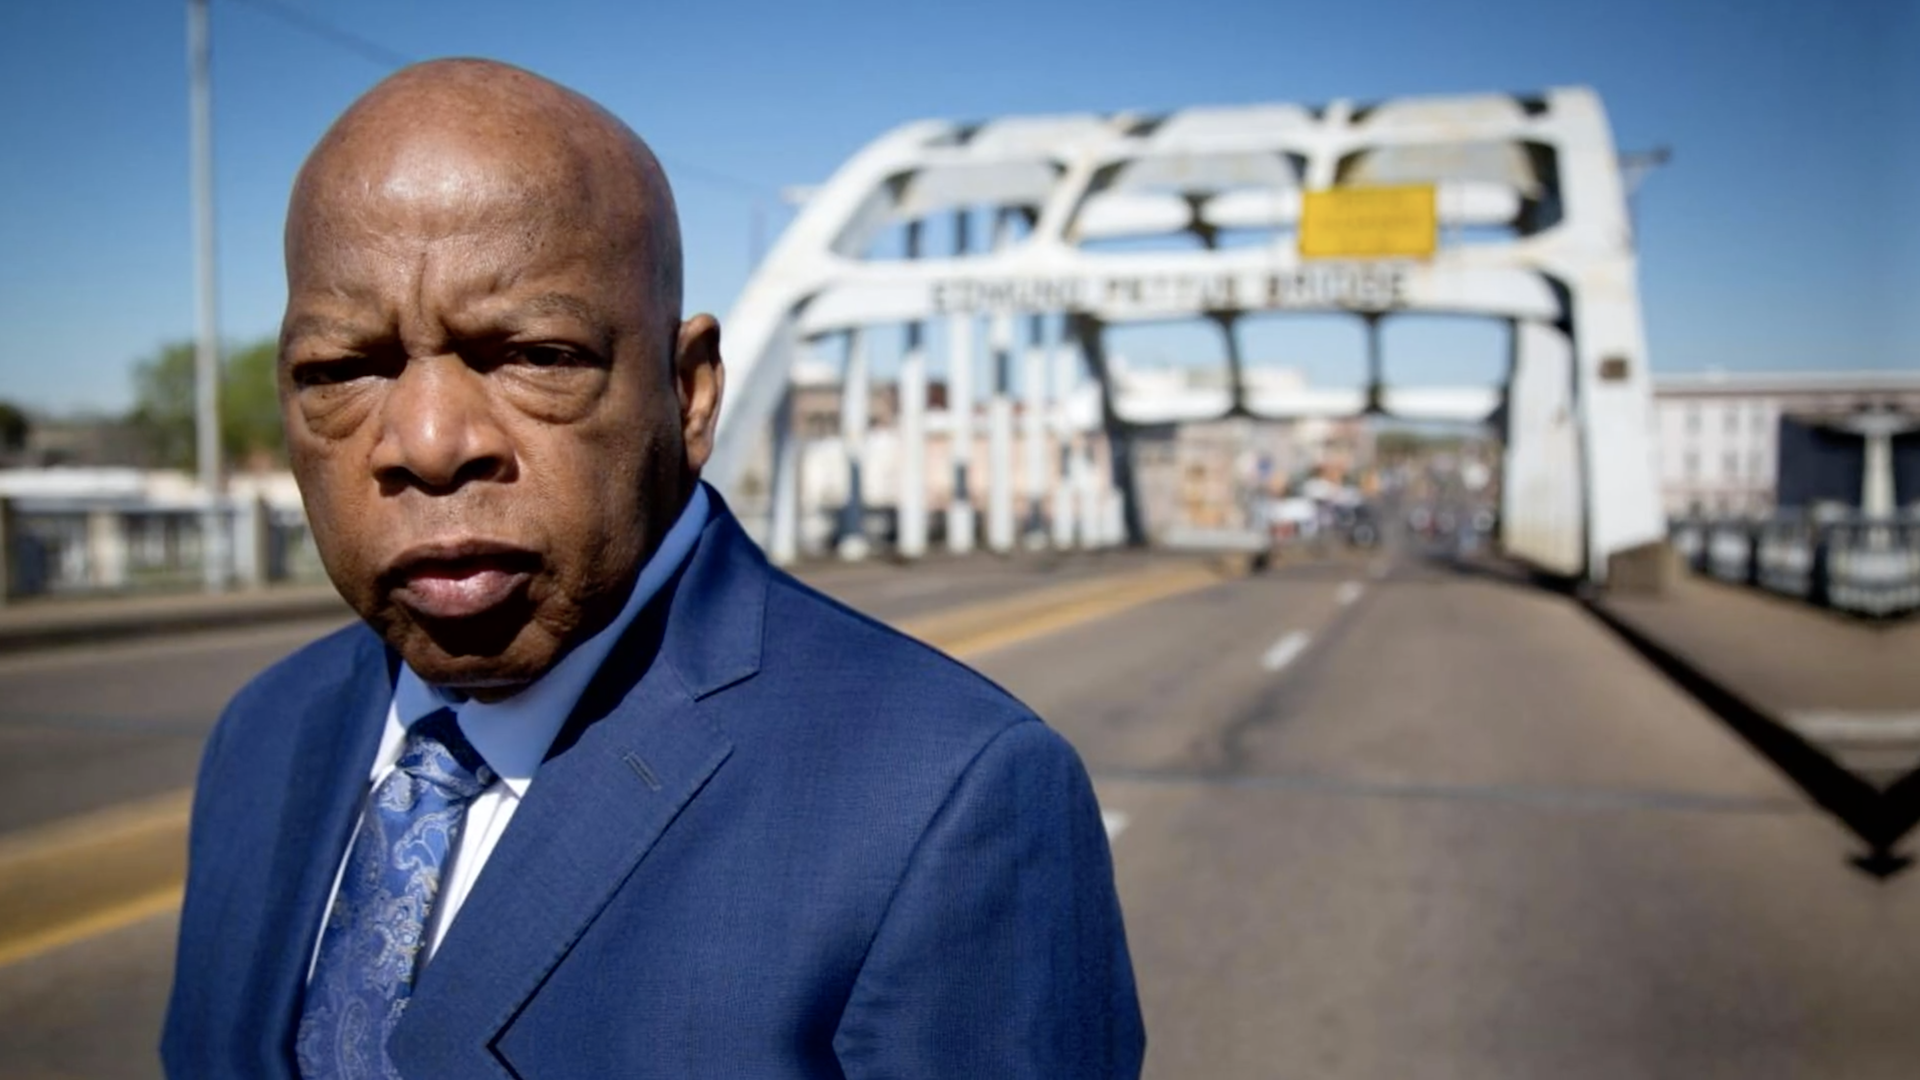 CBS in conjunction with BET to air special titled JOHN LEWIS: CELEBRATING A HERO